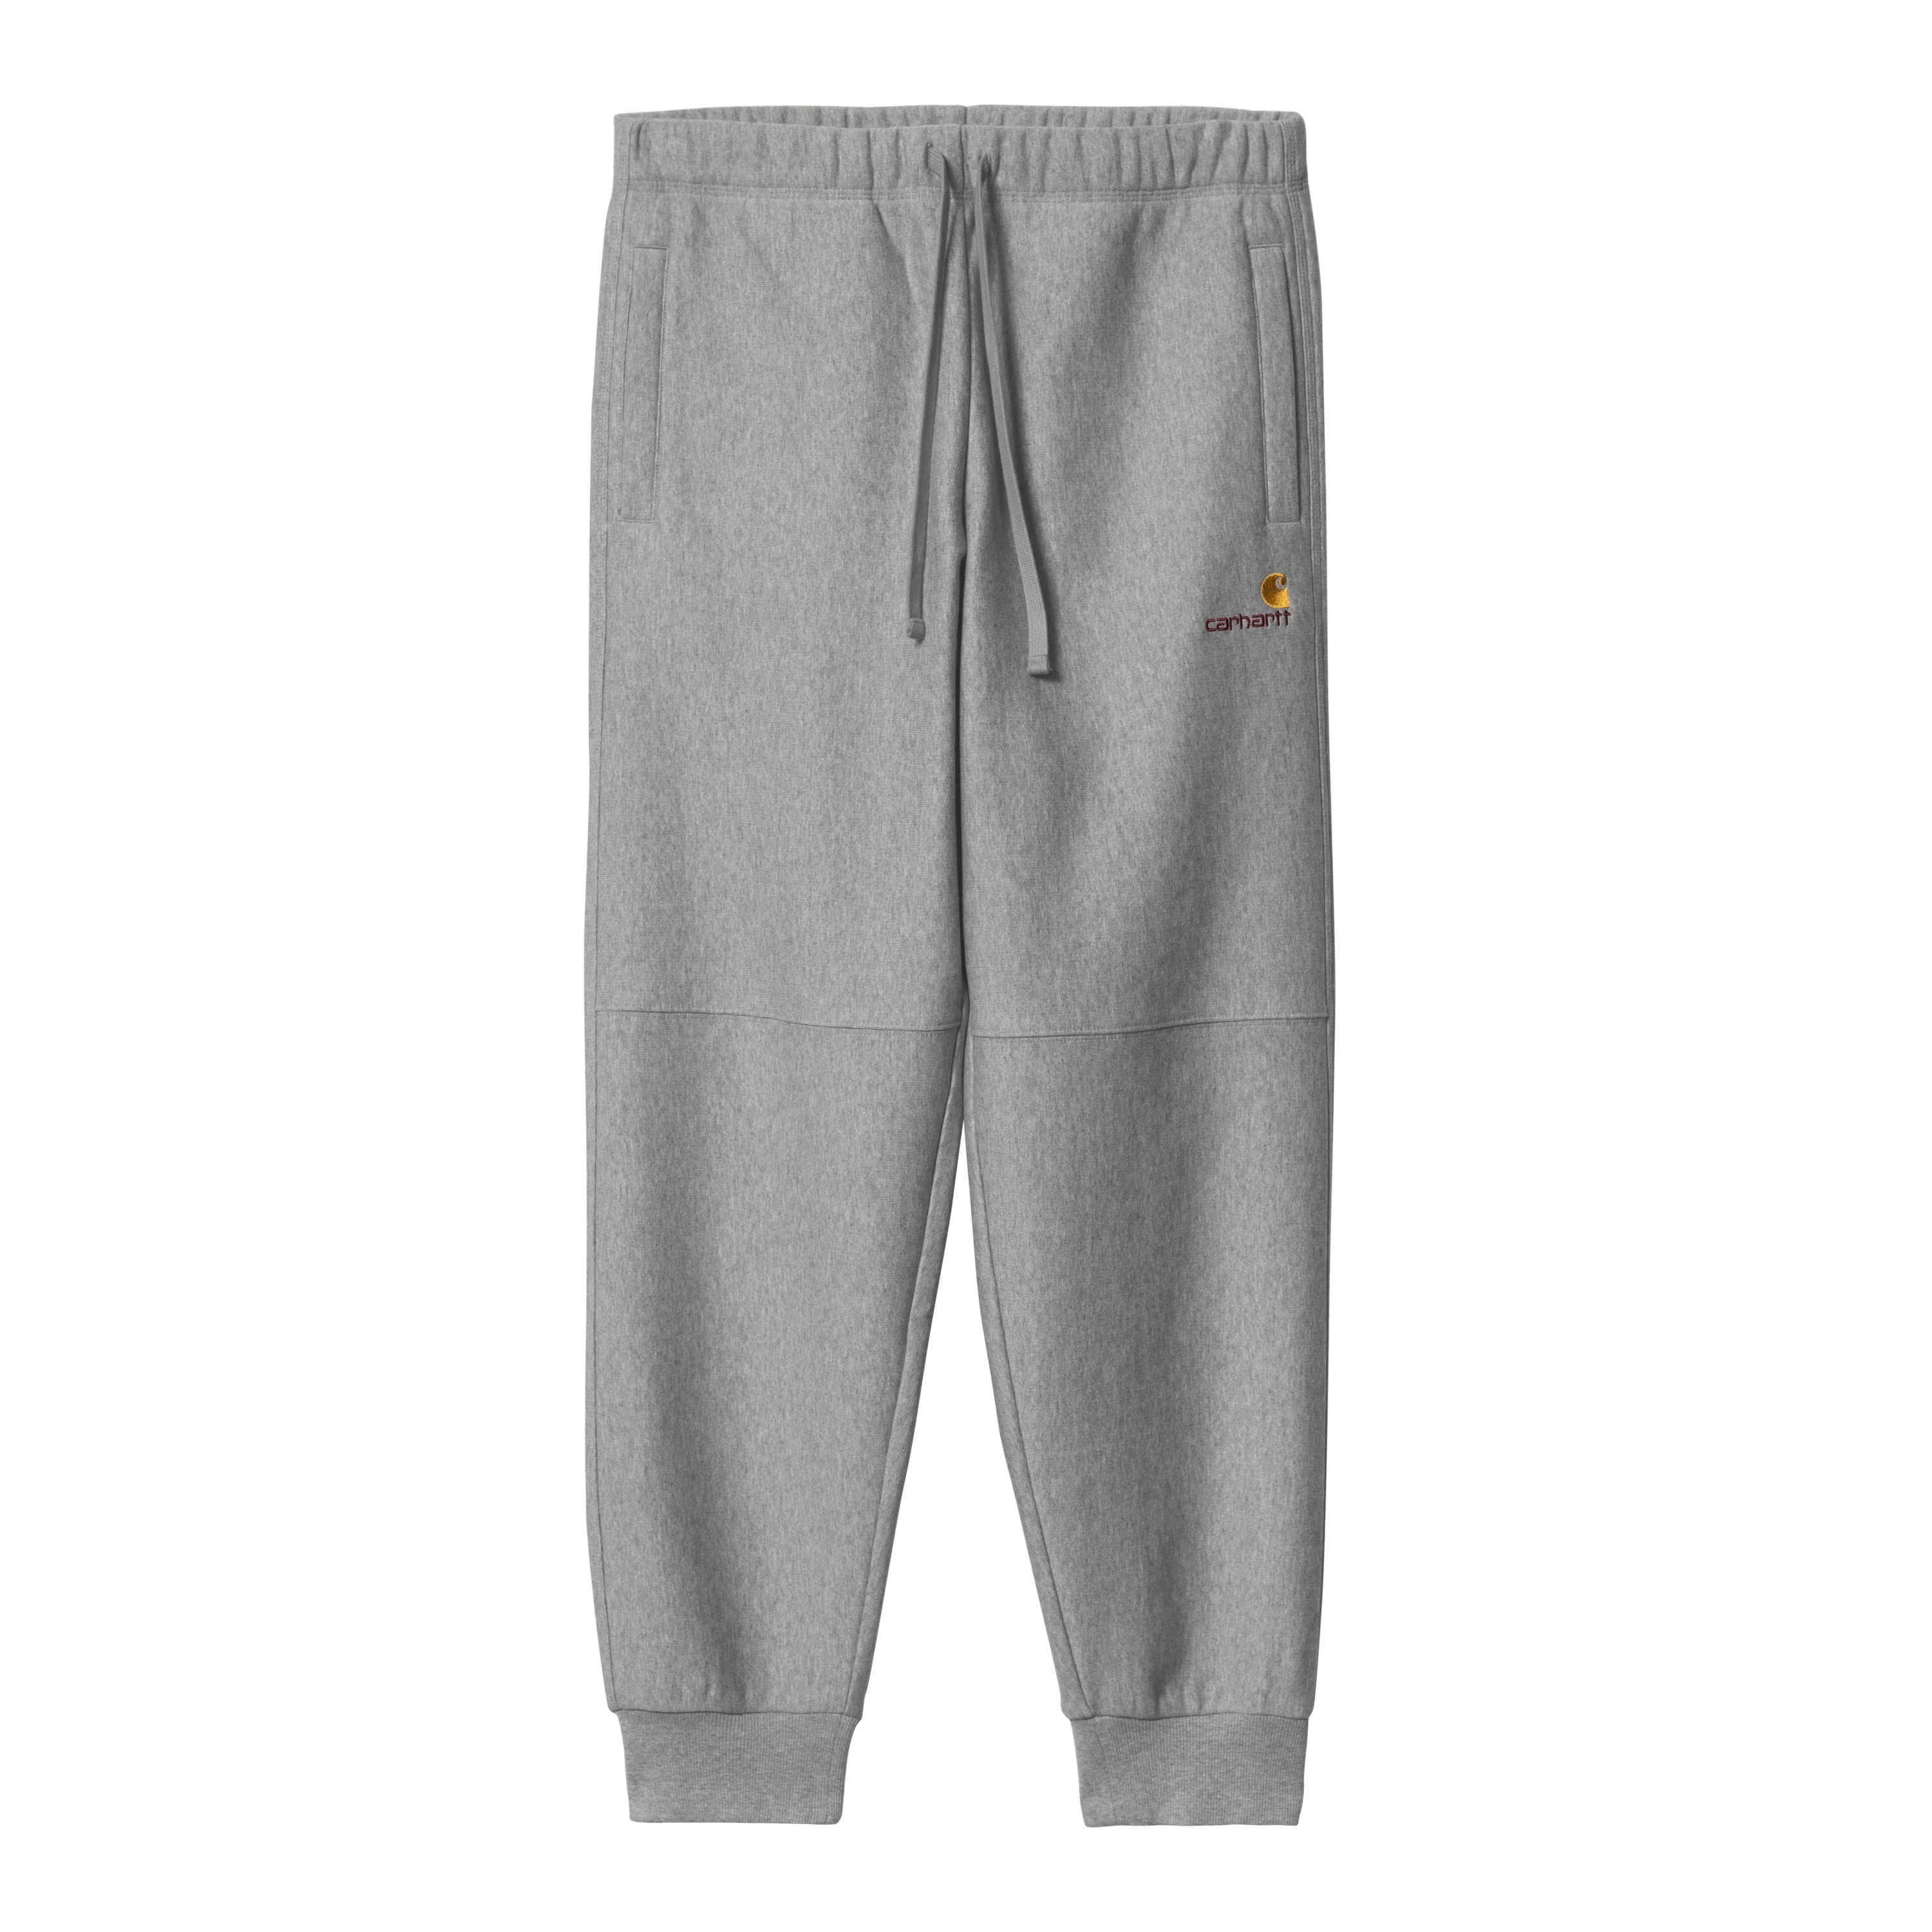 Carhartt Mens Vista Sweatpants Joggers Washed Cotton Cuffed Ankle